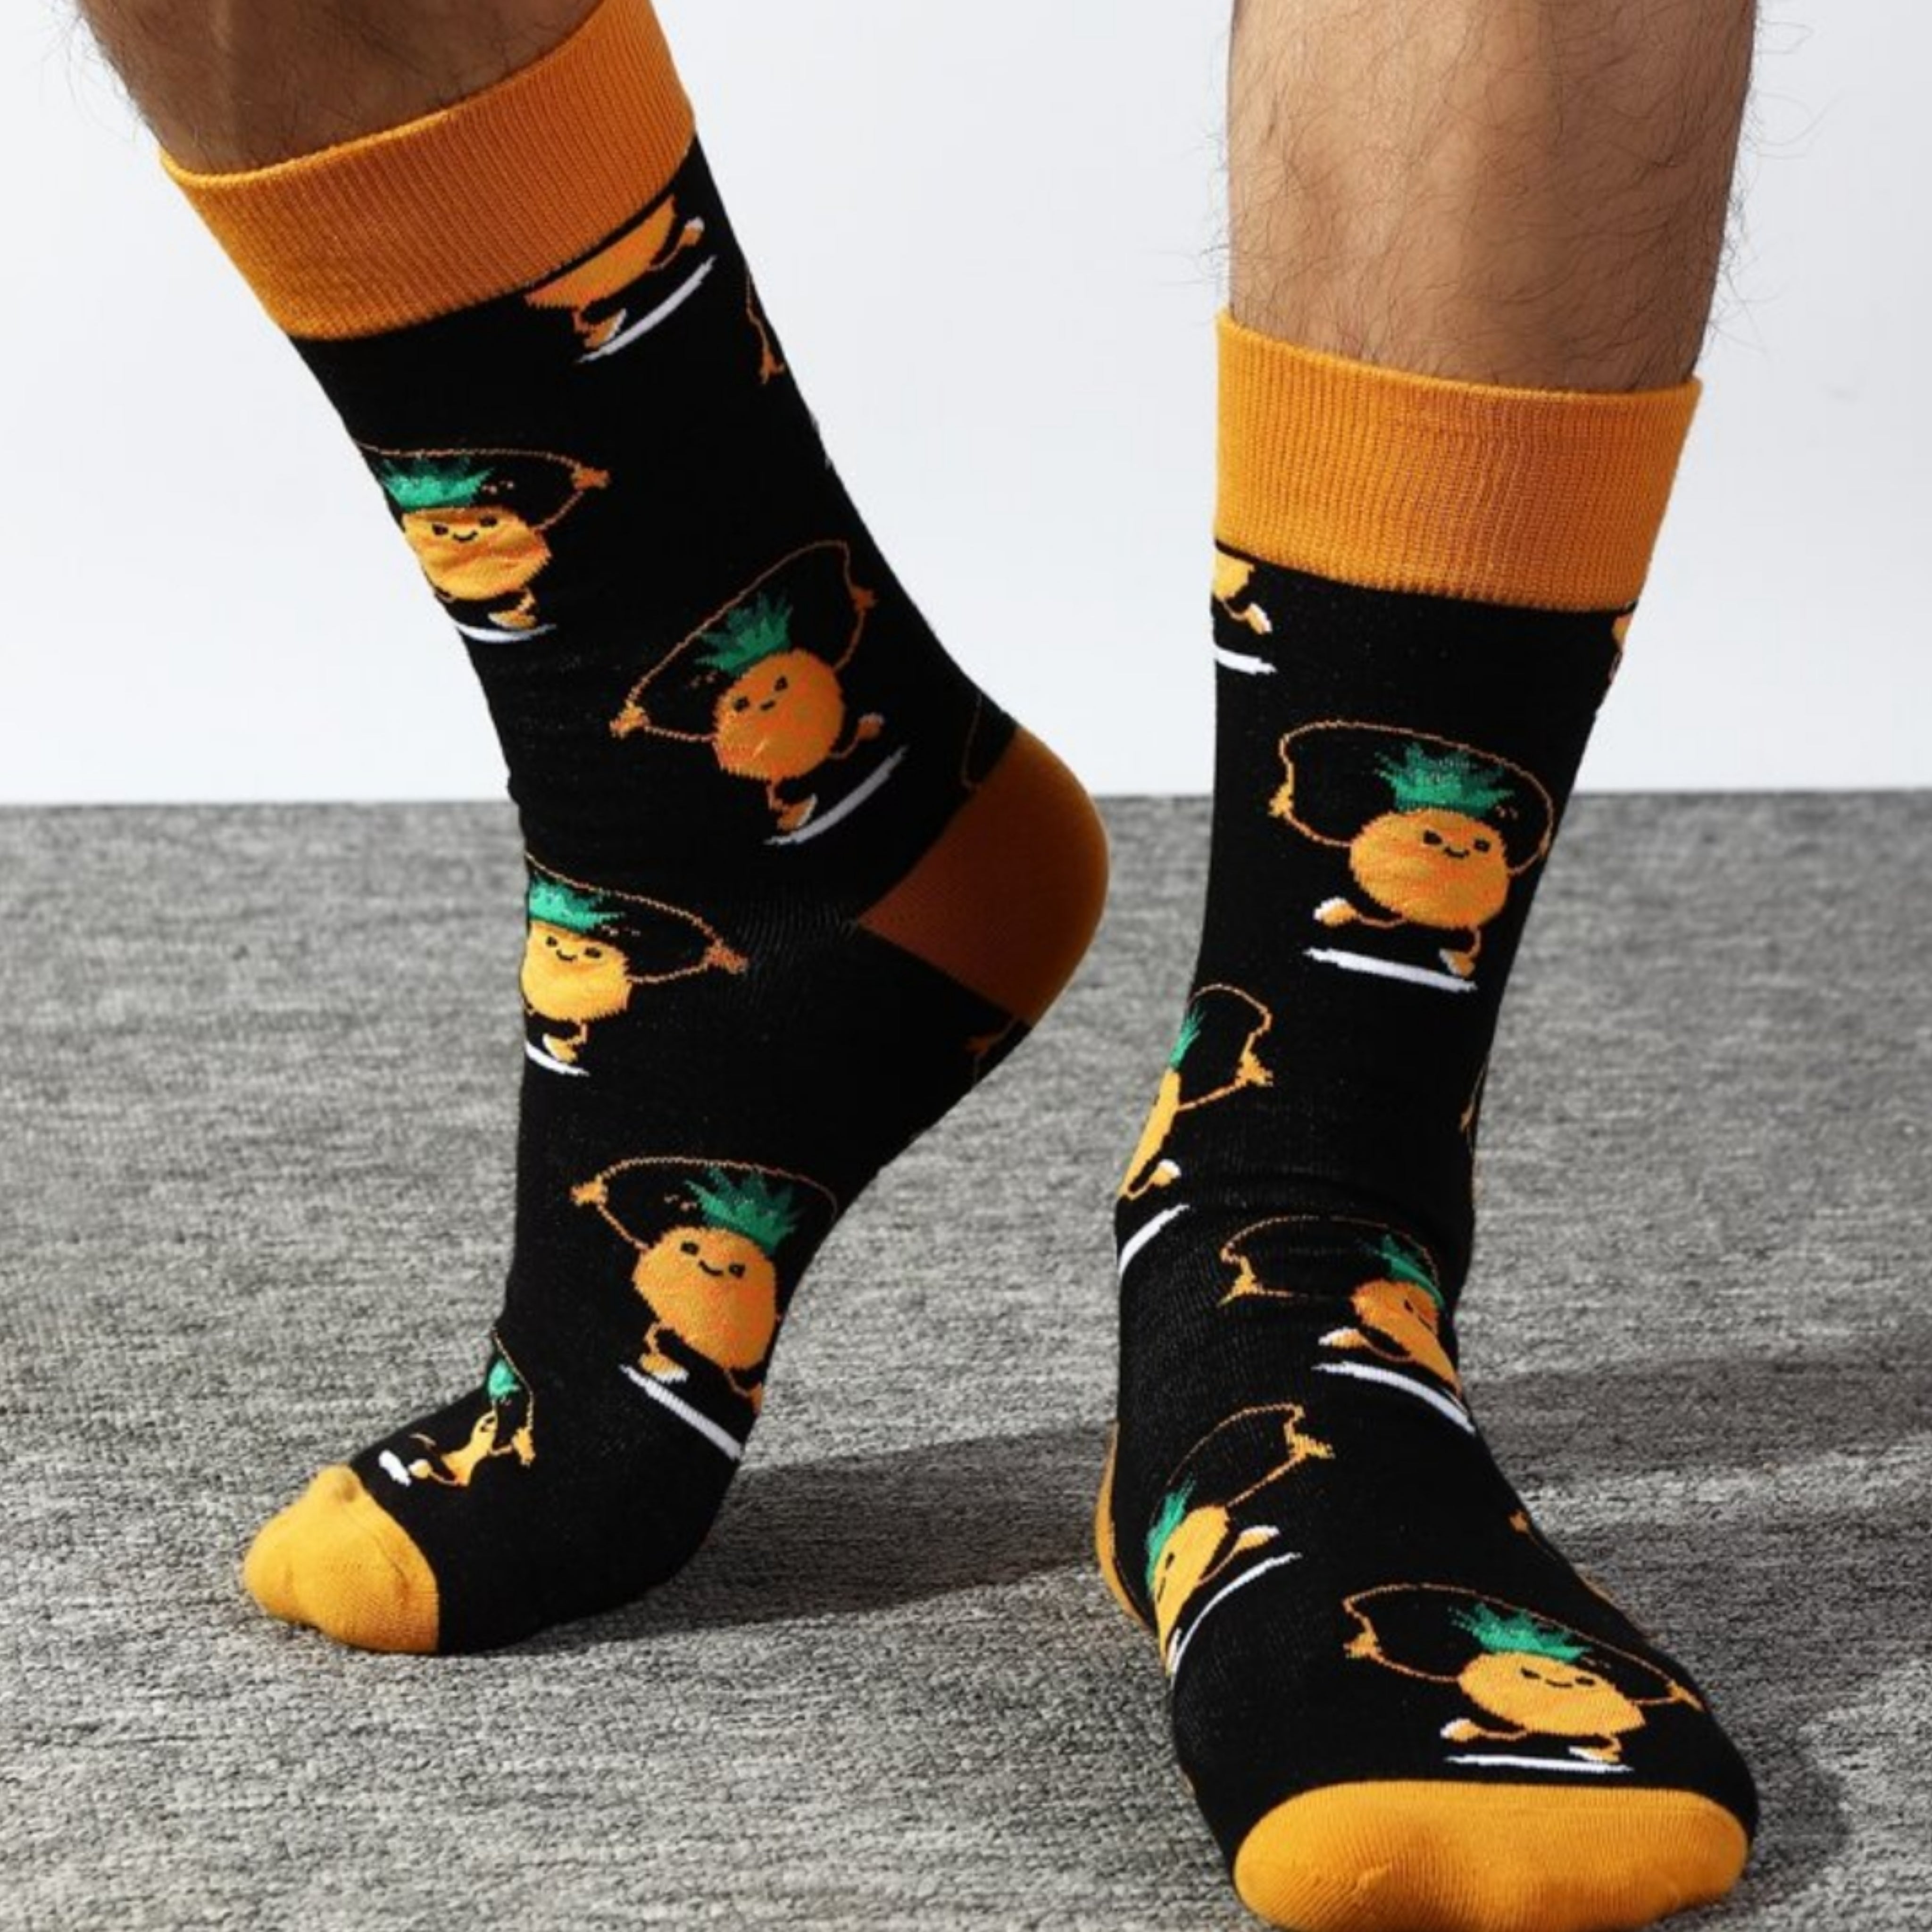 Pineapple Jumping Rope Socks from the Sock Panda (Adult Large)